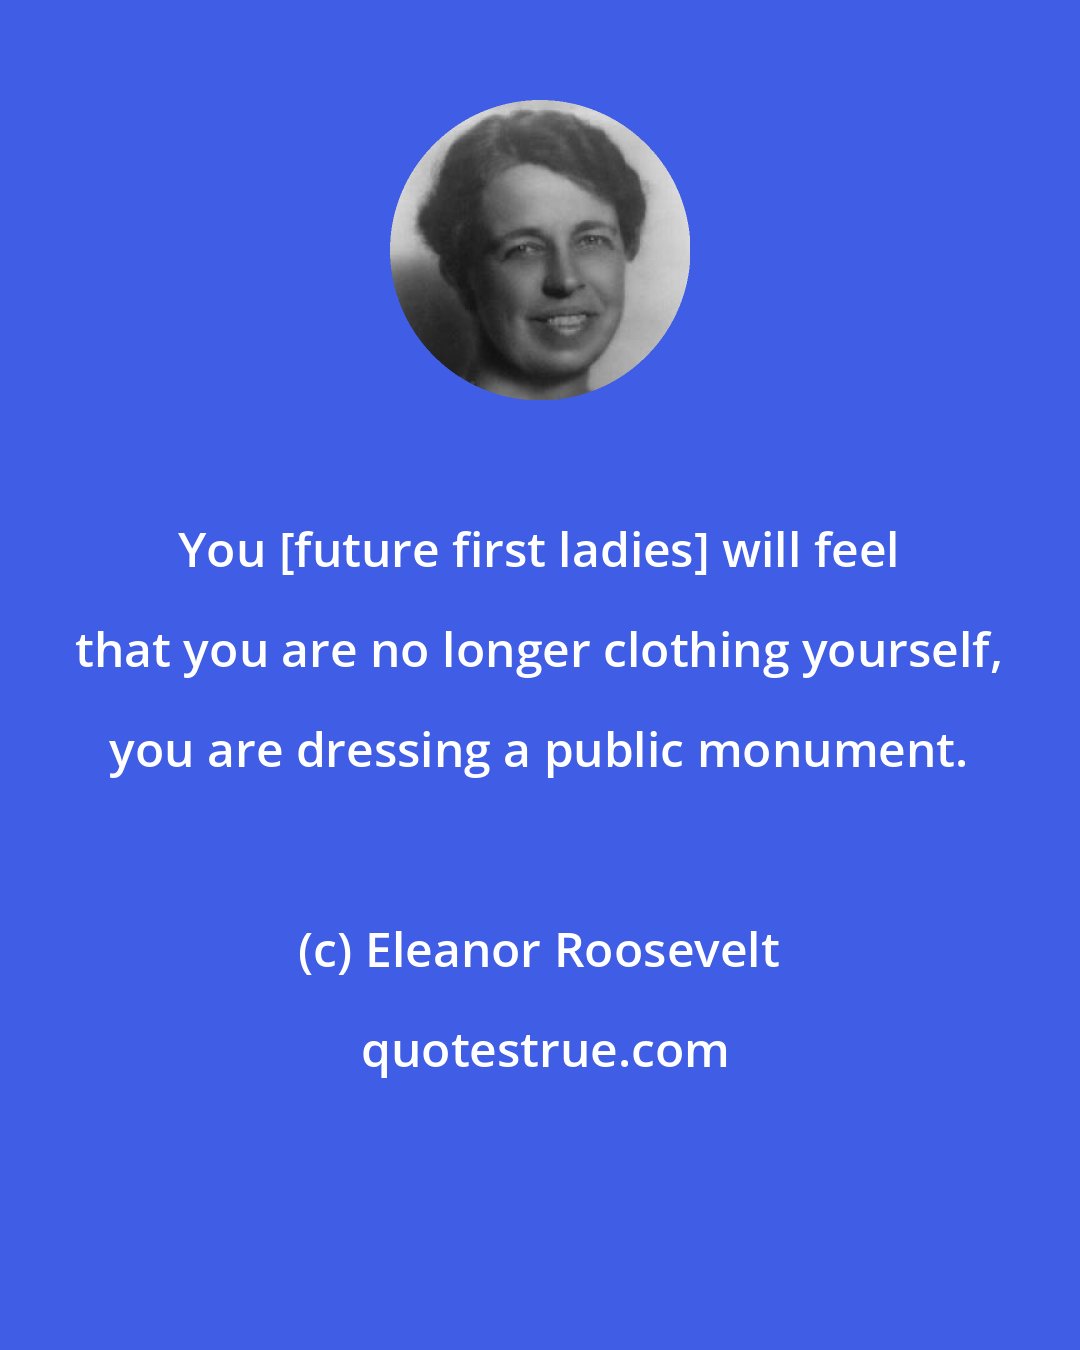 Eleanor Roosevelt: You [future first ladies] will feel that you are no longer clothing yourself, you are dressing a public monument.